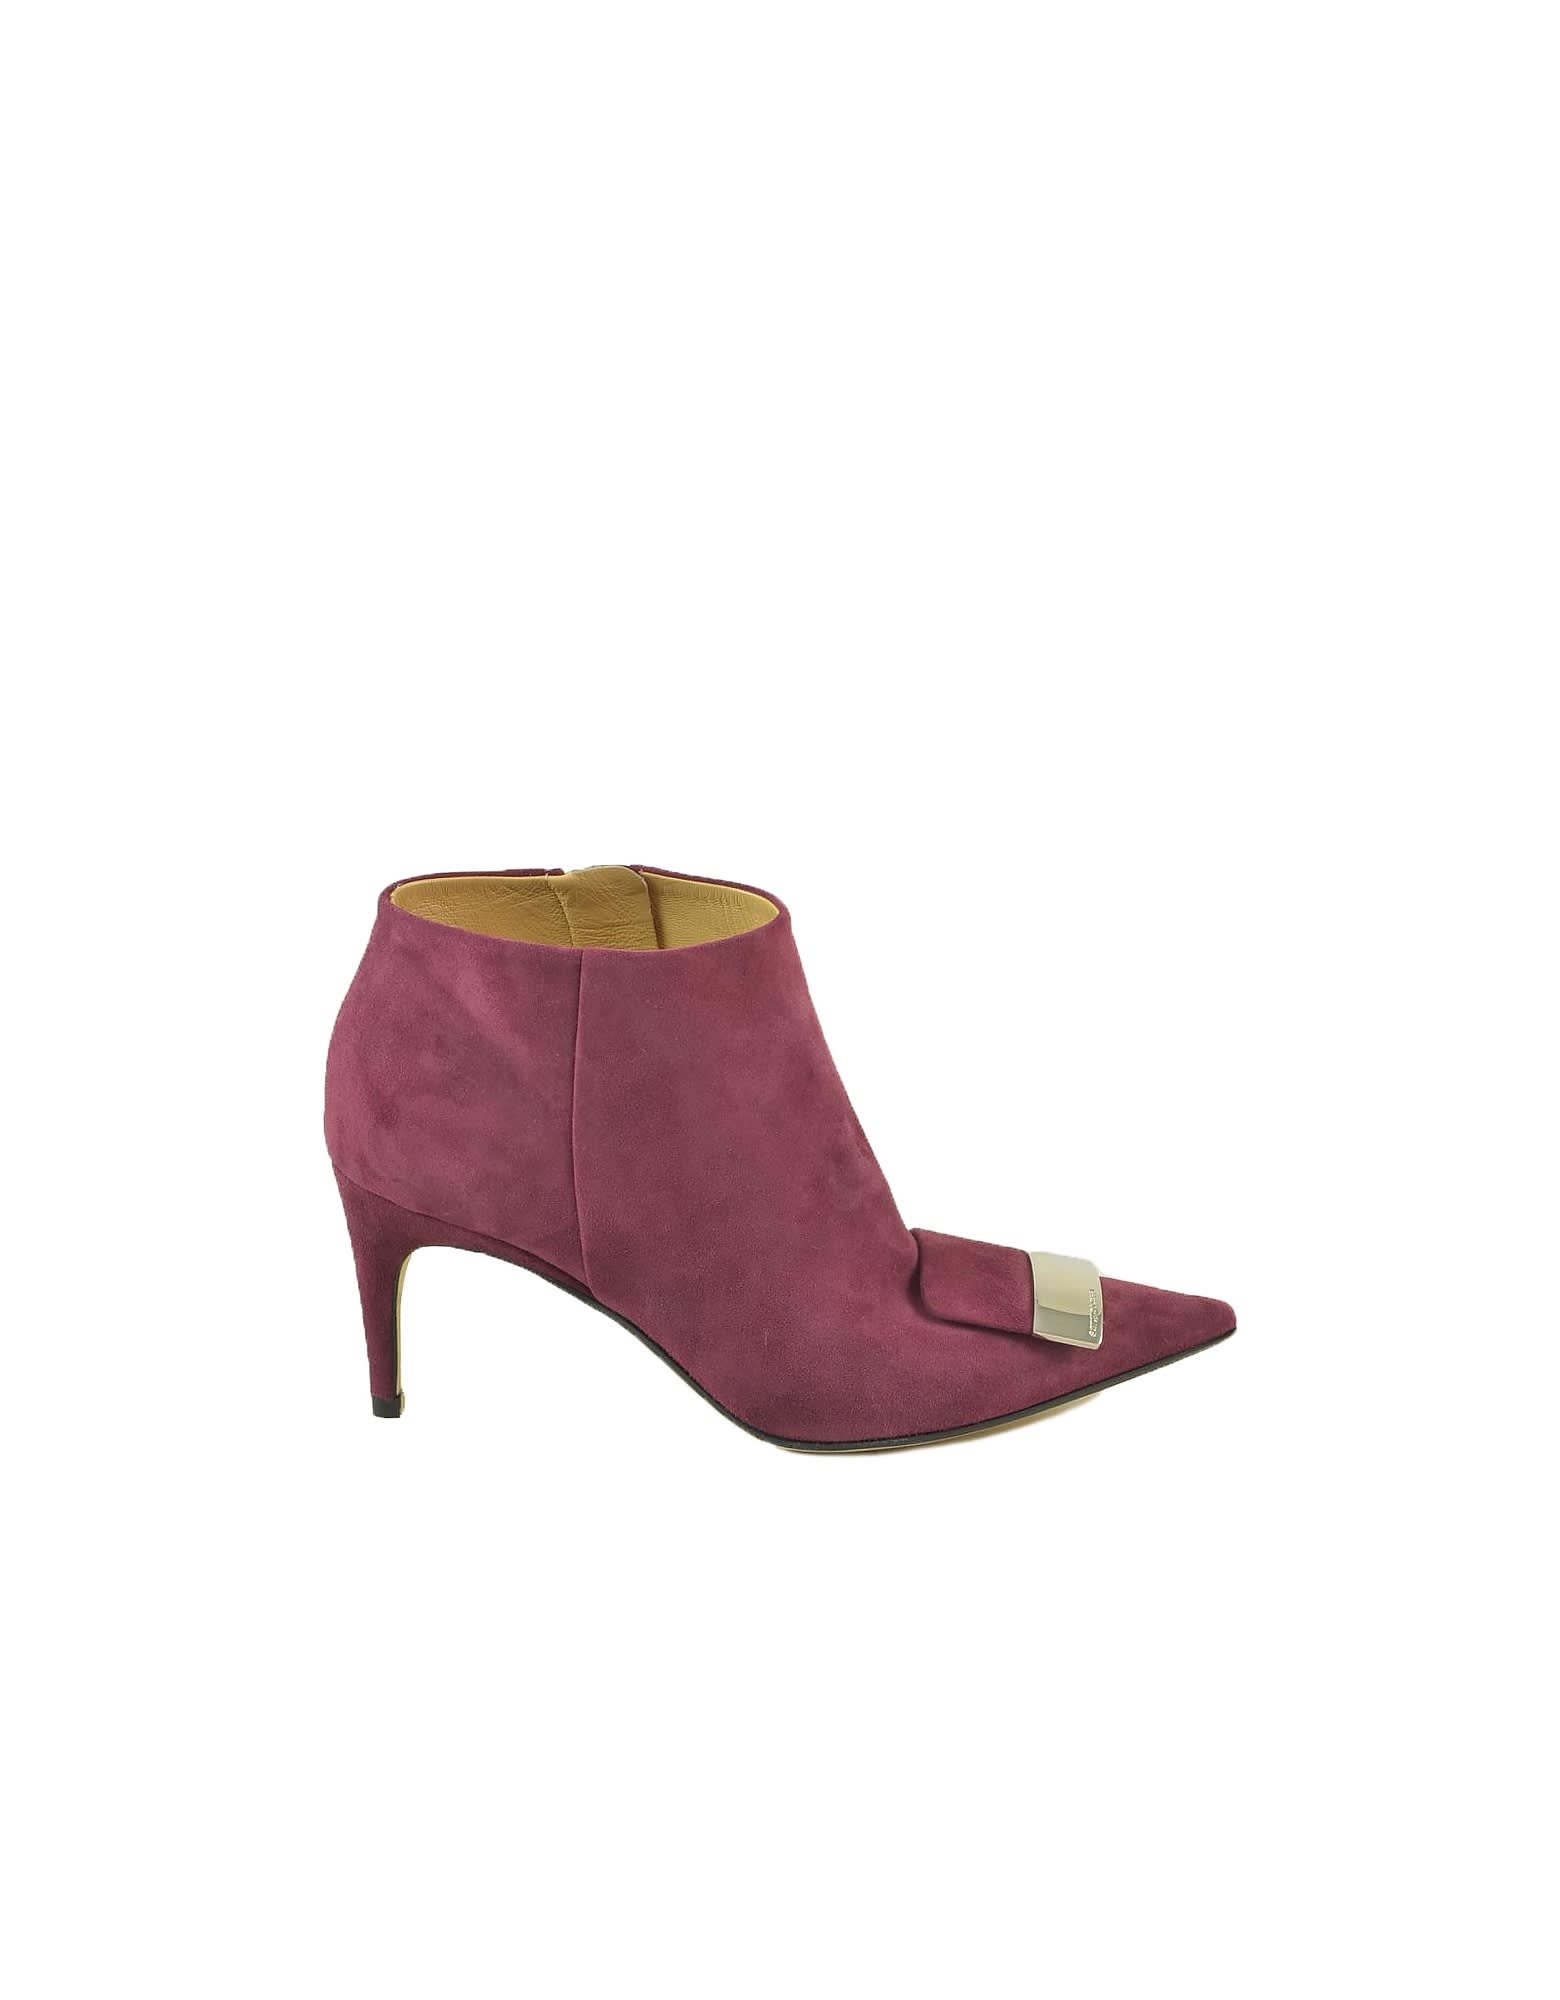 Sergio Rossi Burgundy Suede Ankle Booties